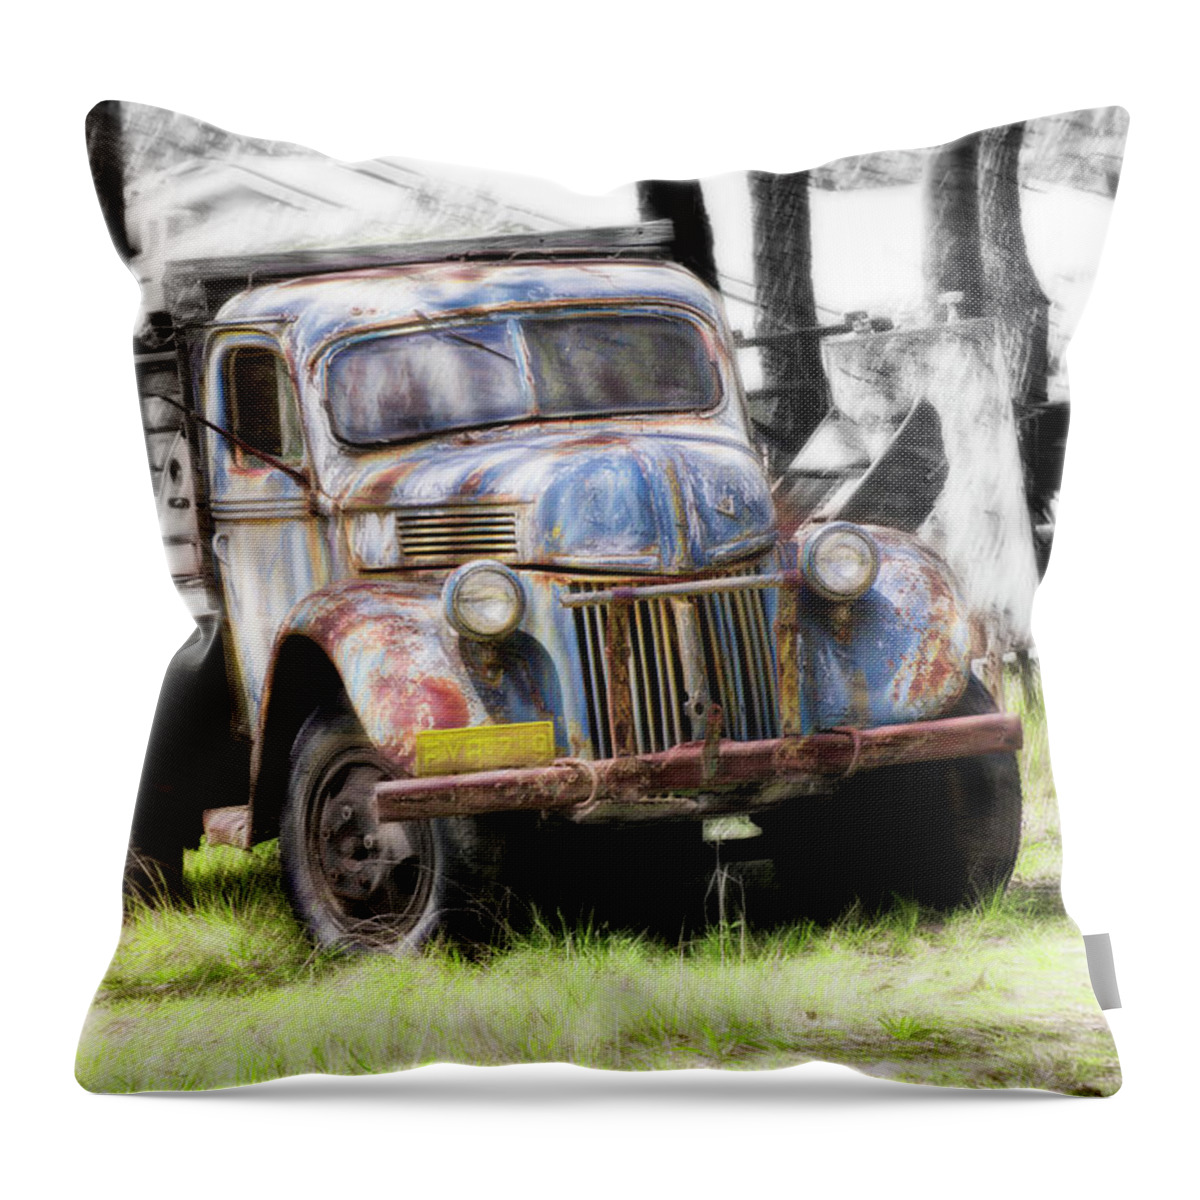 Vintage Truck Photo Prints Throw Pillow featuring the digital art Aged 01 by Kevin Chippindall